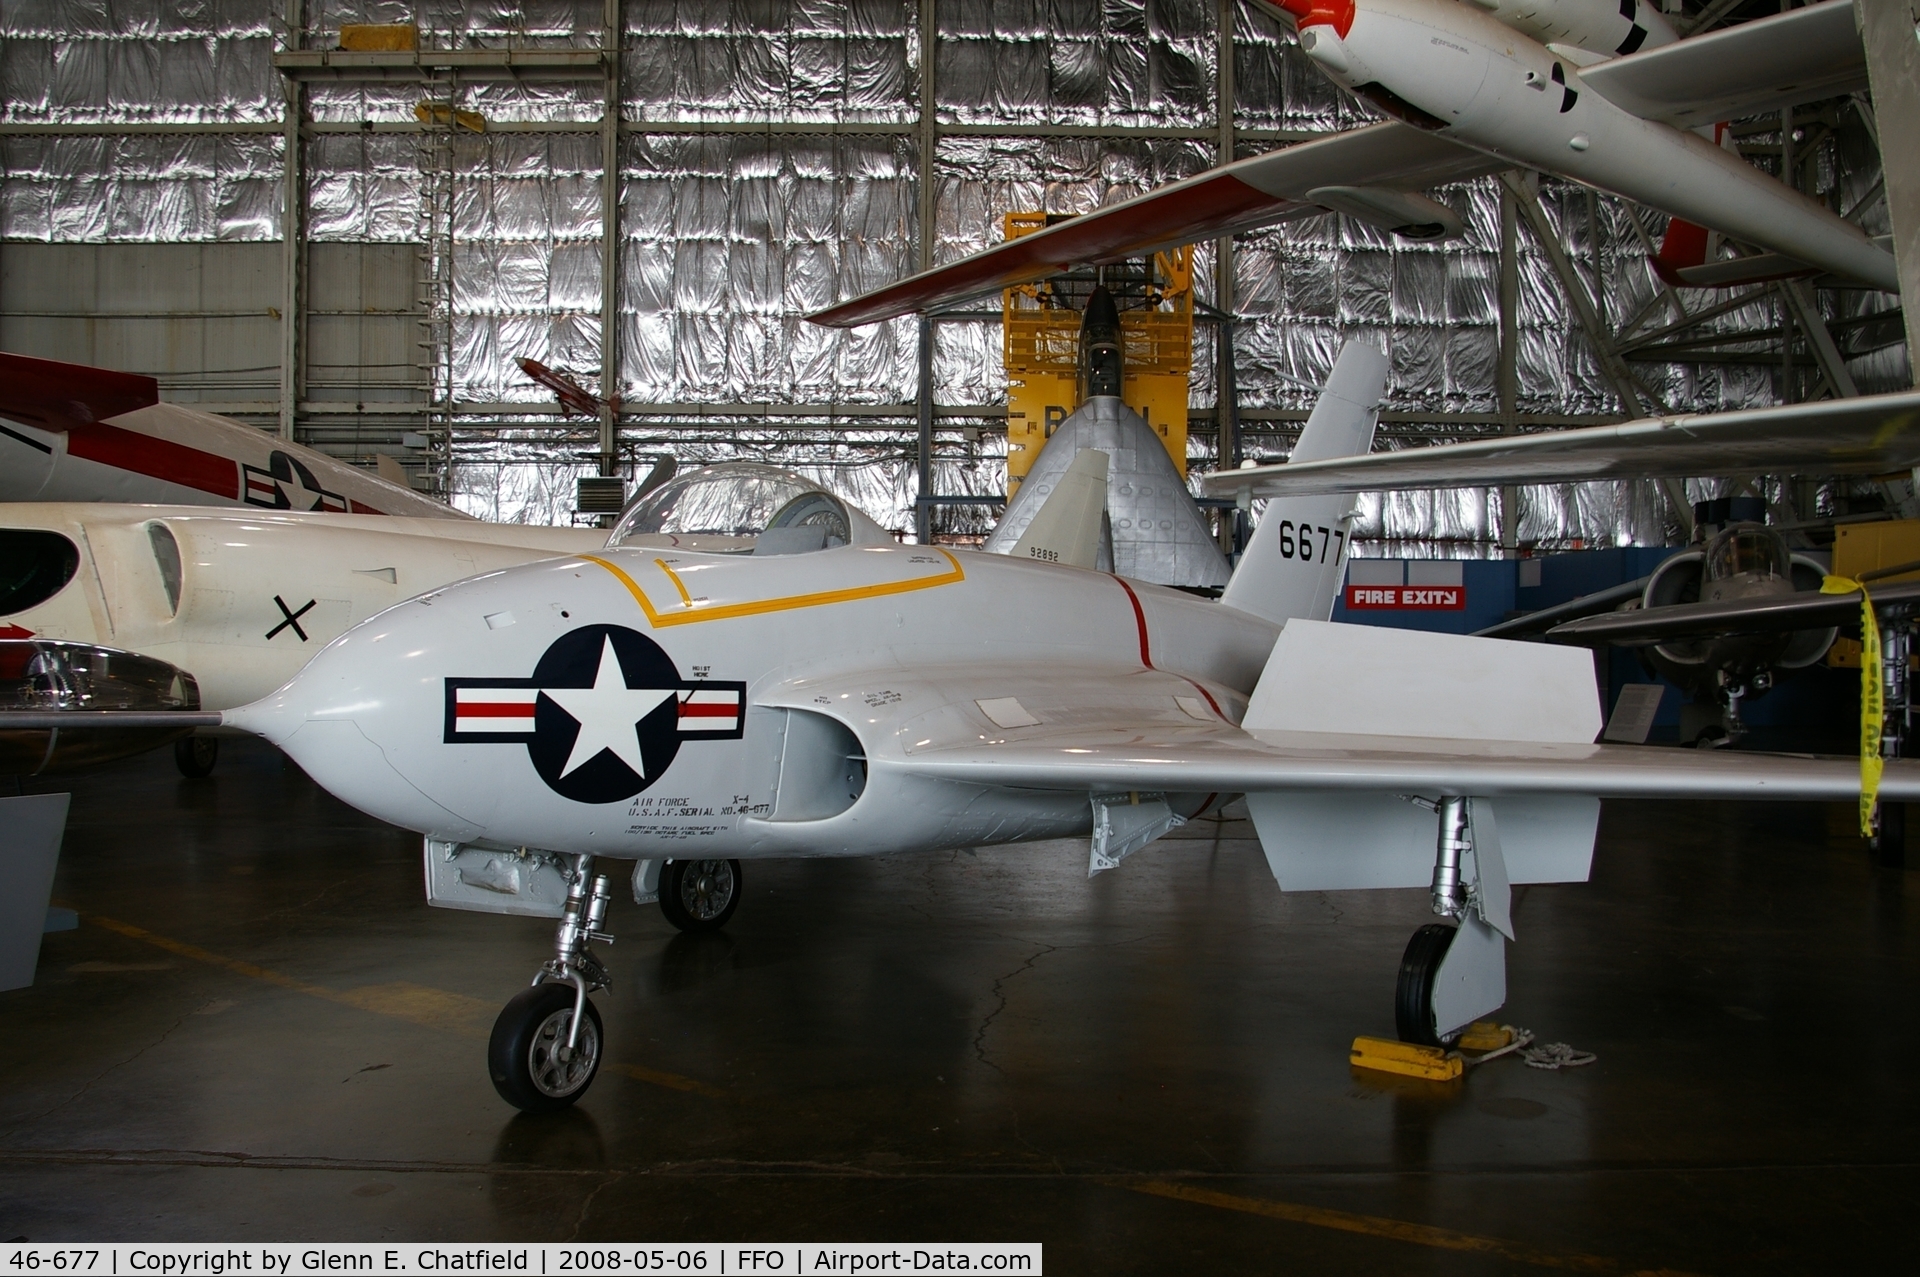 46-677, 1946 Northrop X-4 Bantam C/N Not found (46-677), Displayed at the National Museum of the U.S. Air Force